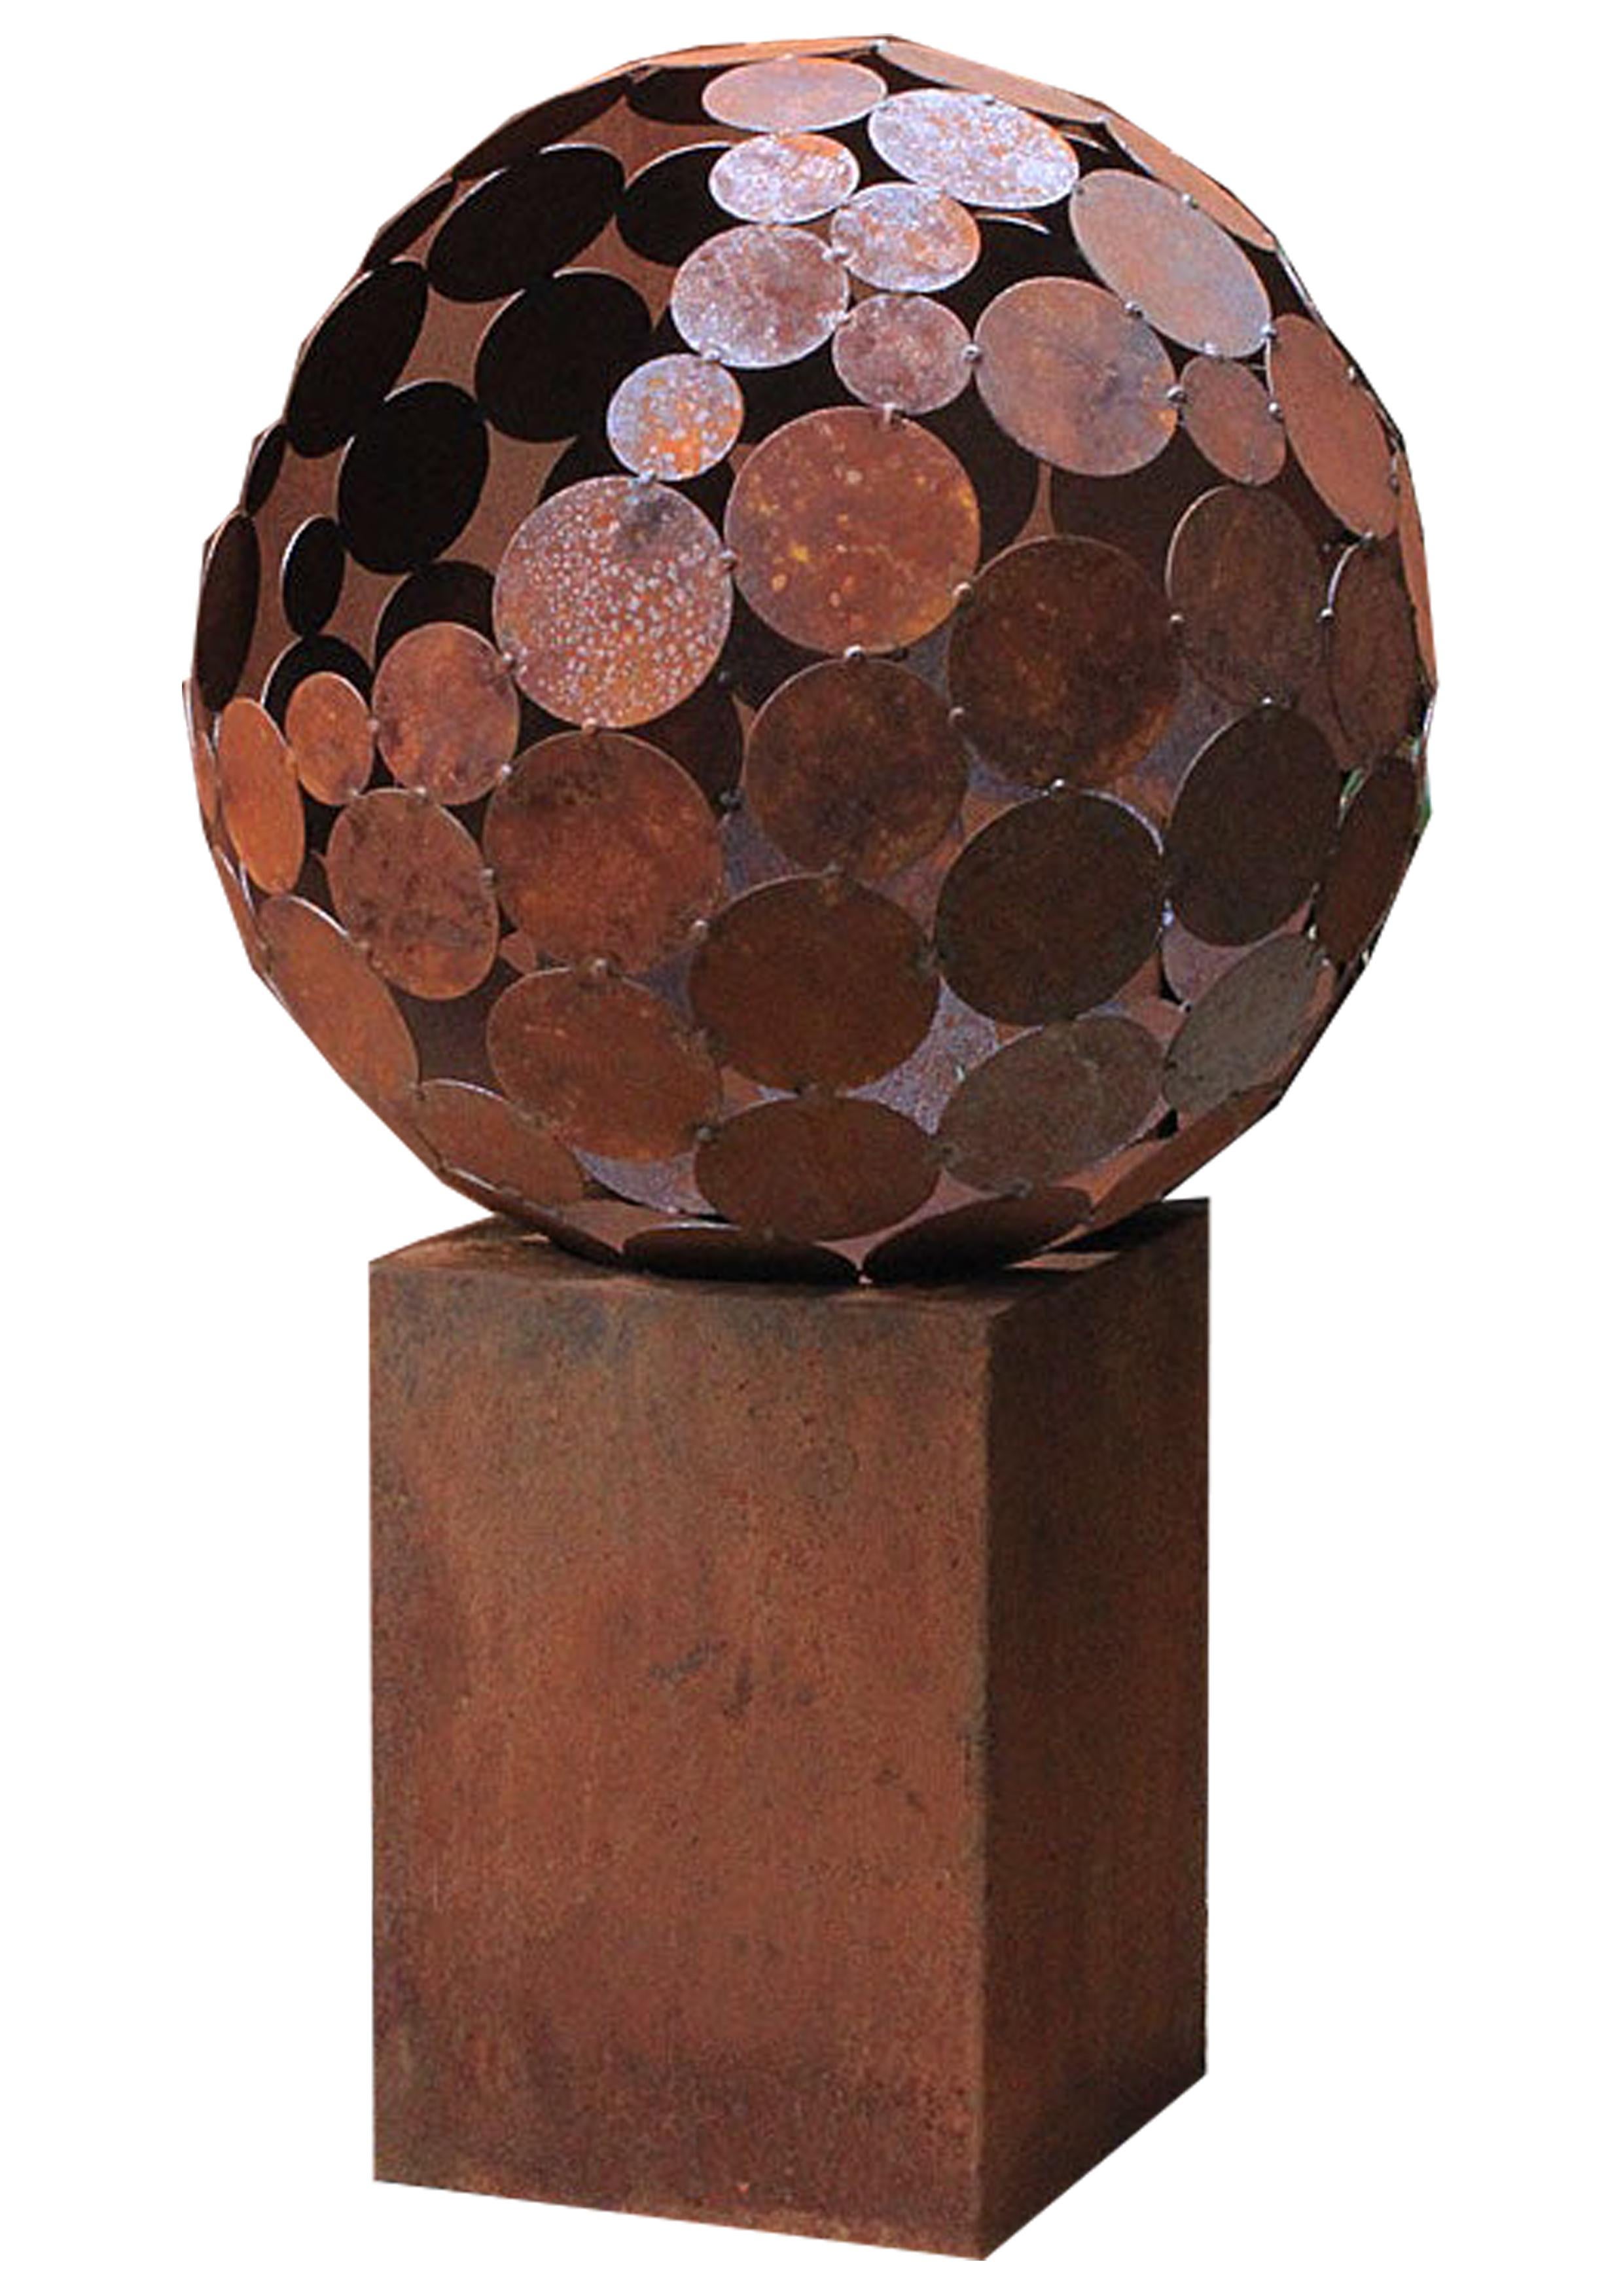 Firepit "Globe" With Square Pedestal - Small - Sculpture by Stefan Traloc